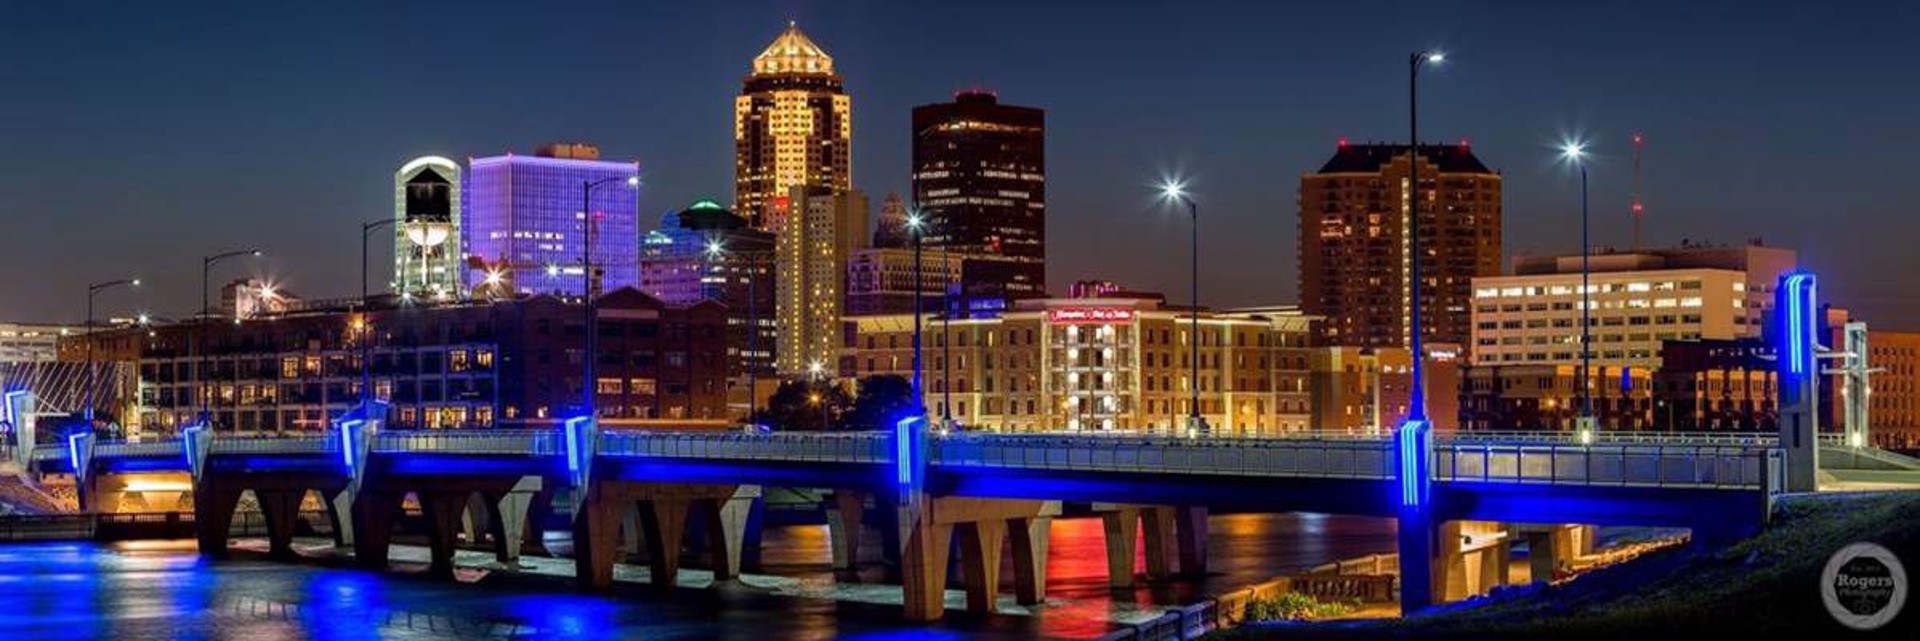 Des Moines Skyline Night by Justin Rogers